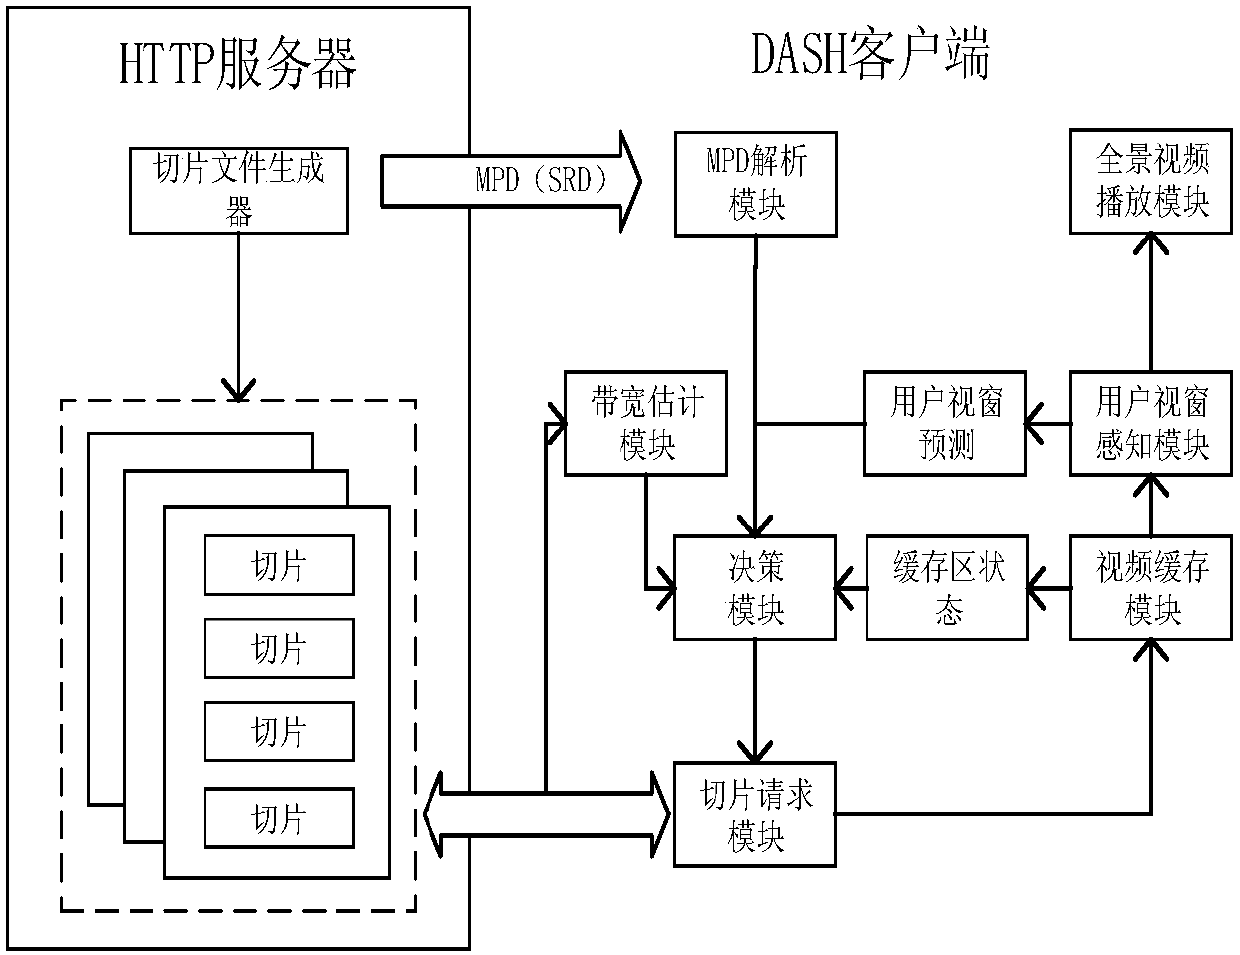 Panorama video adaptive transmission method based on DASH (Dynamic Adaptive Streaming over HTTP)